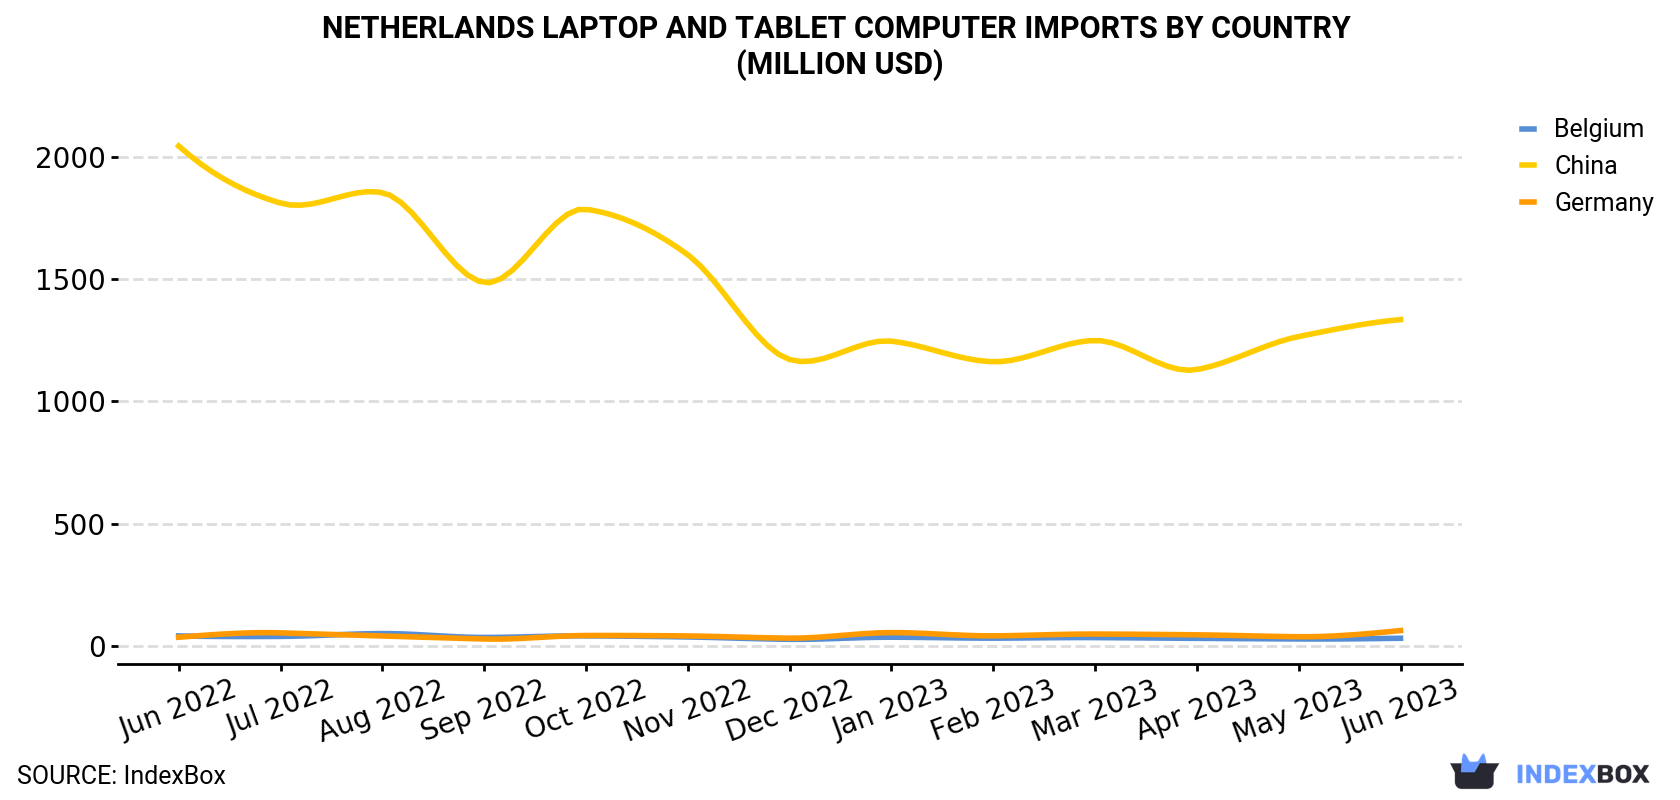 Netherlands Laptop and Tablet Computer Imports By Country (Million USD)